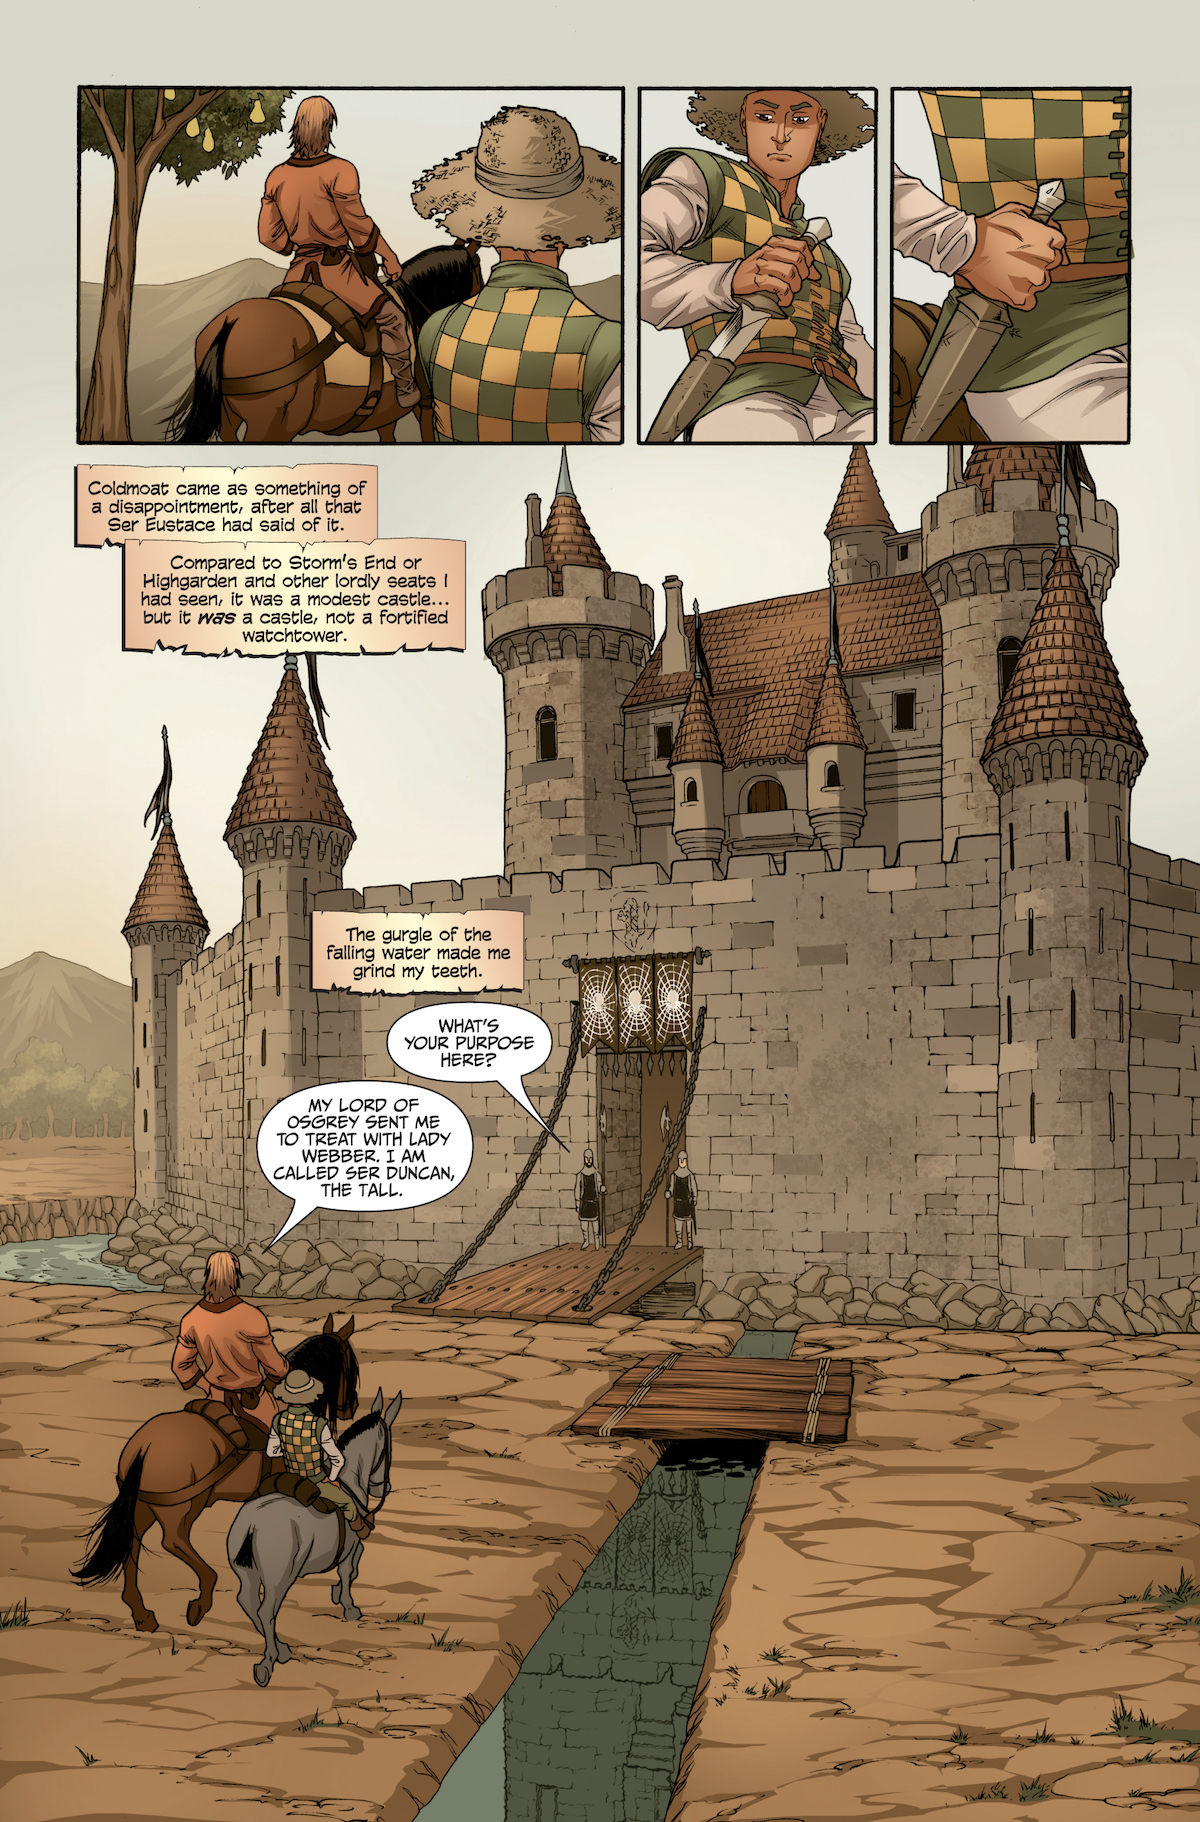 A panel from The Sworn Sword showing Dunk and Egg talking in front of a castle